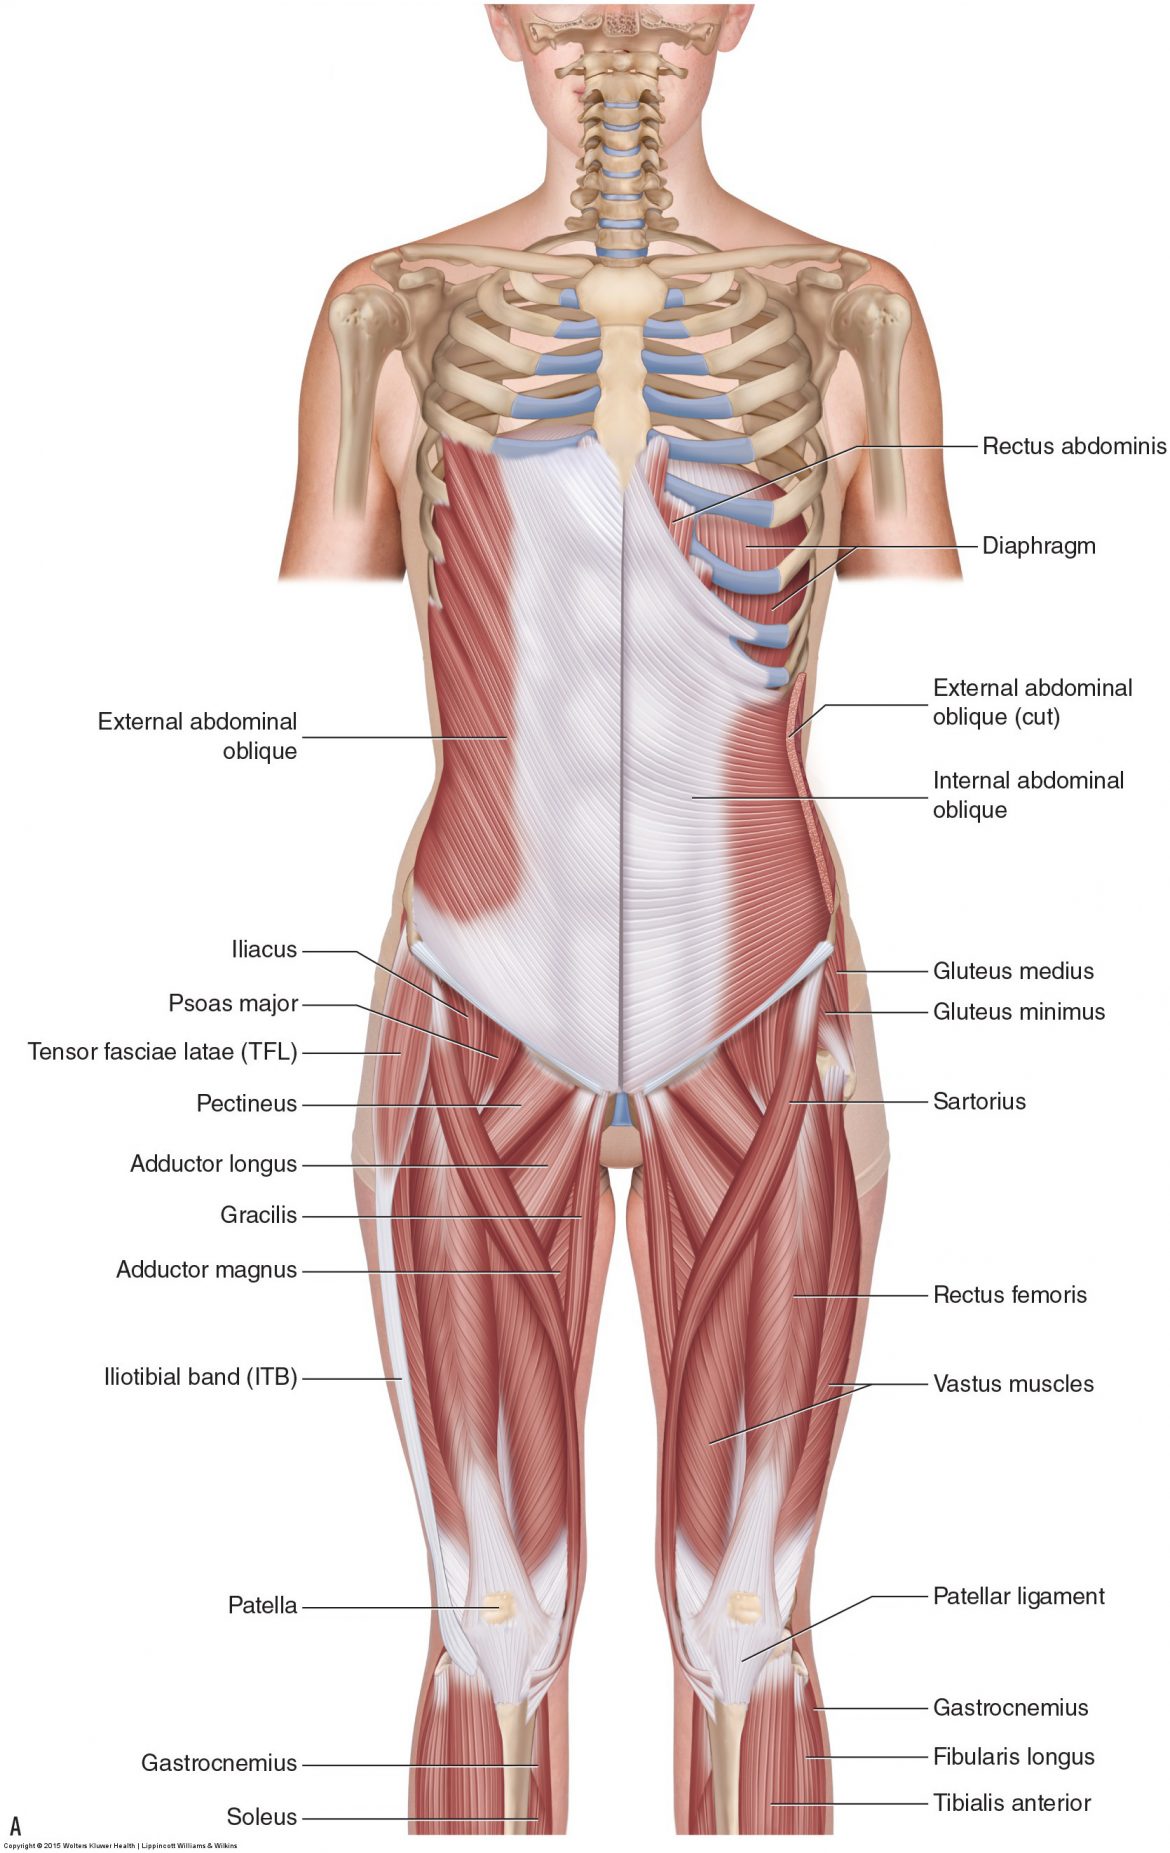 Muscles of the low back - Learn Muscles